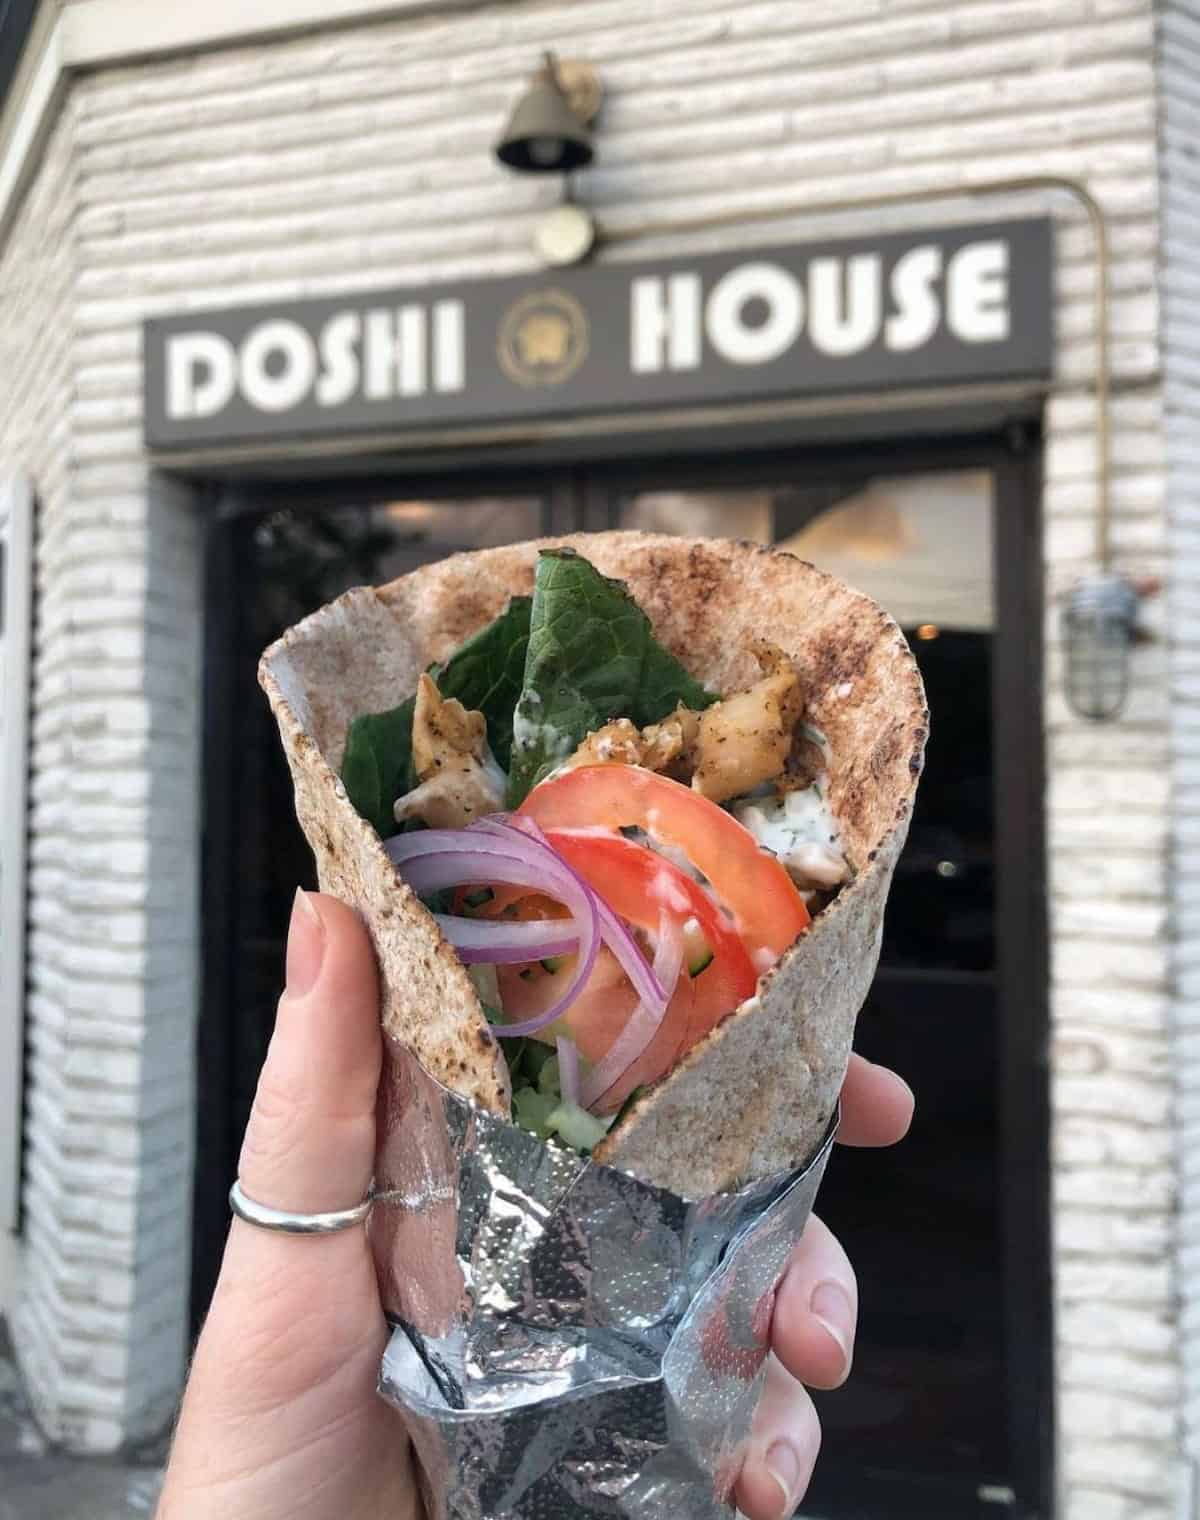 A hand holding a vegan gyro near the entrance of the Doshi House in Houston, Texas.